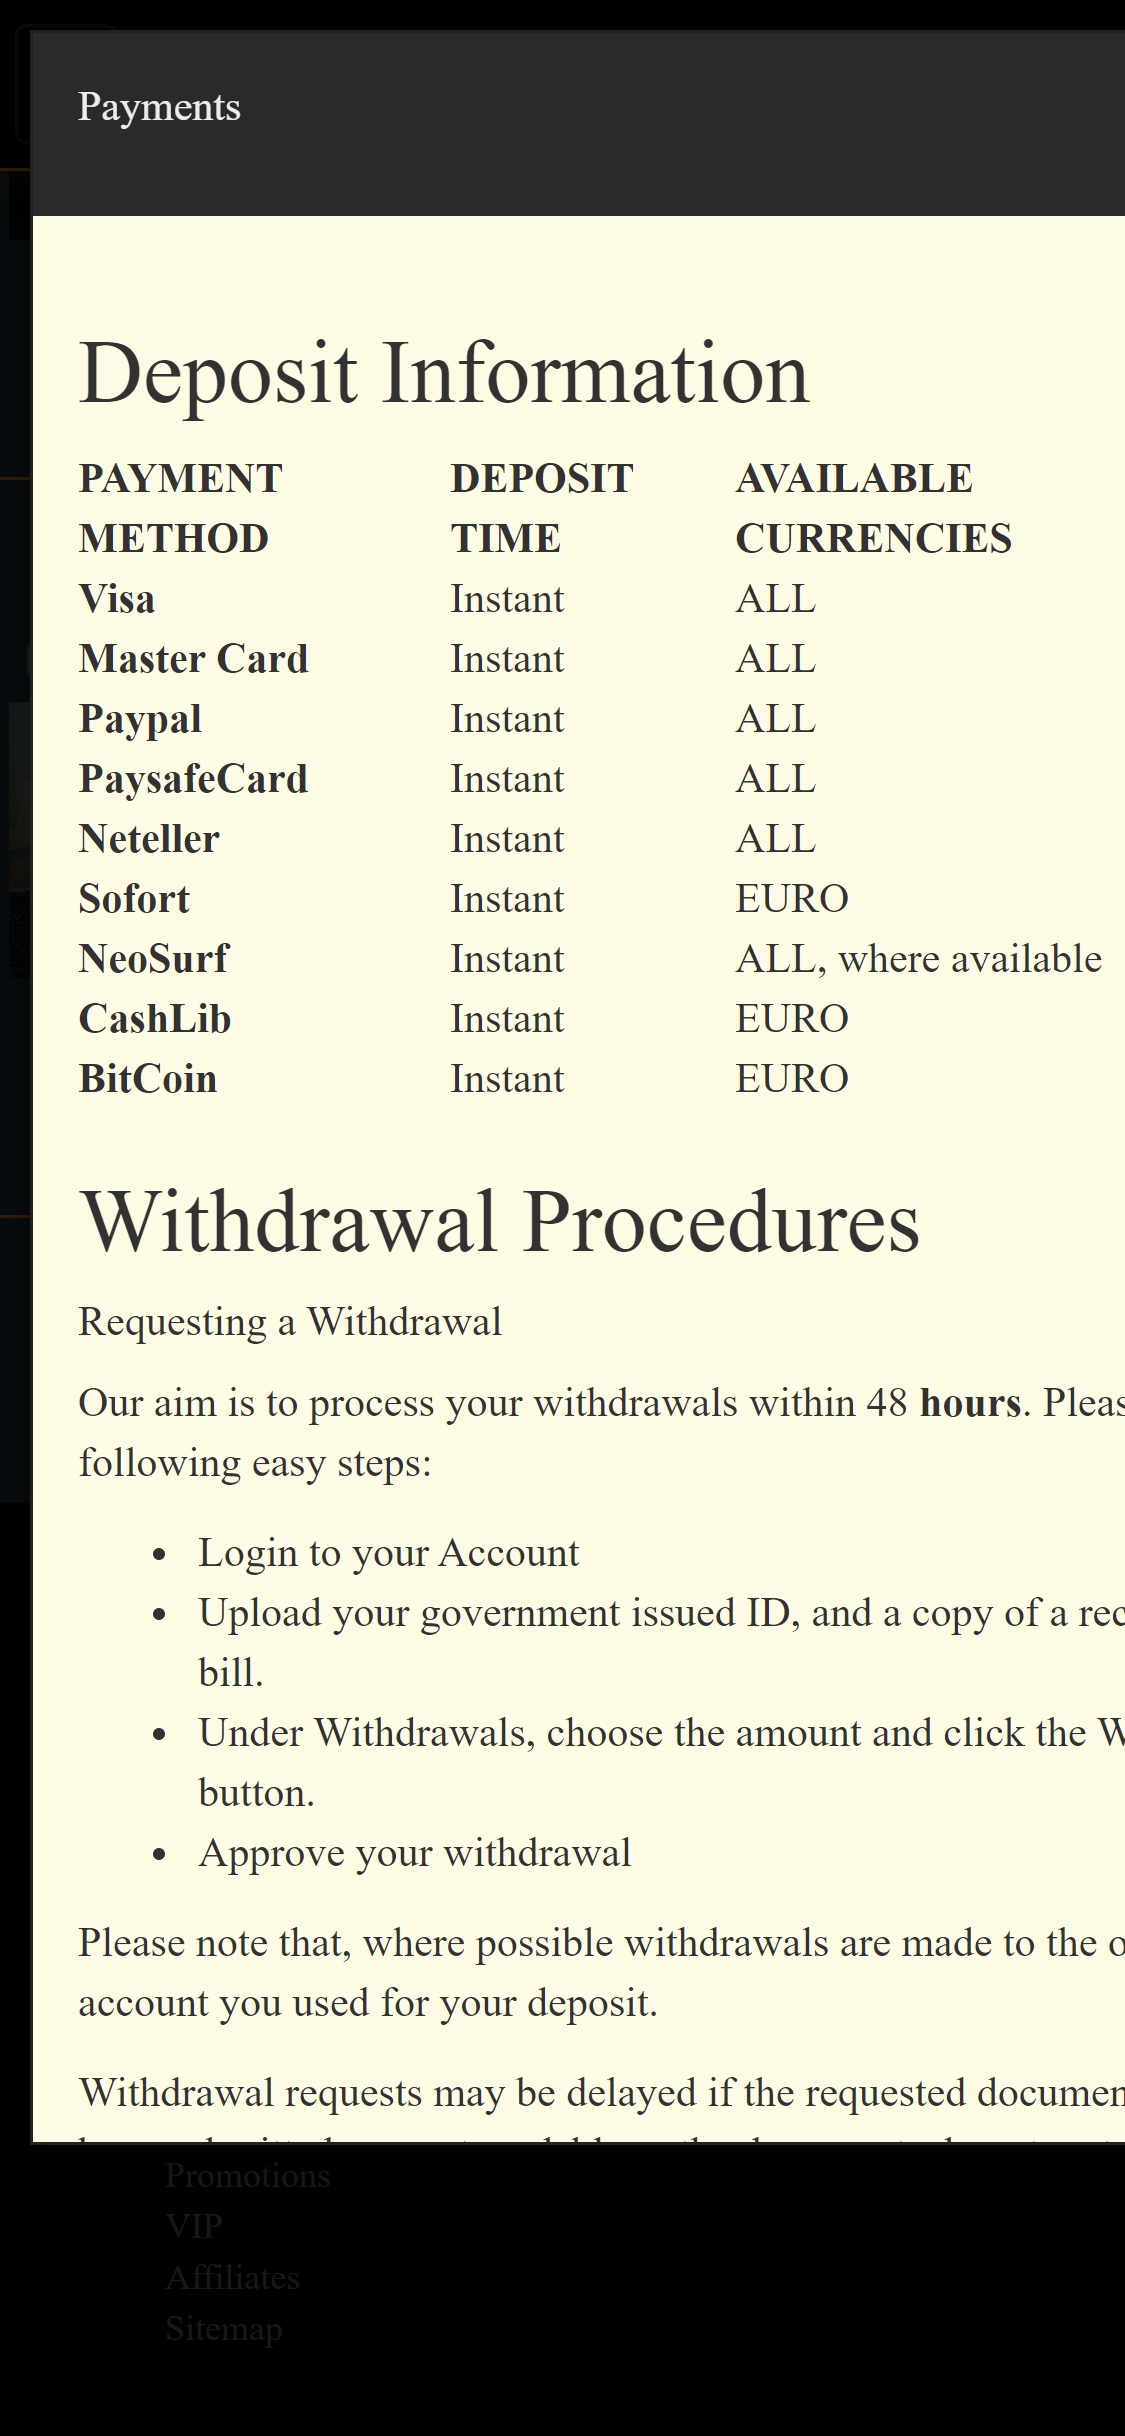 WikiWins Mobile Payment Methods Review